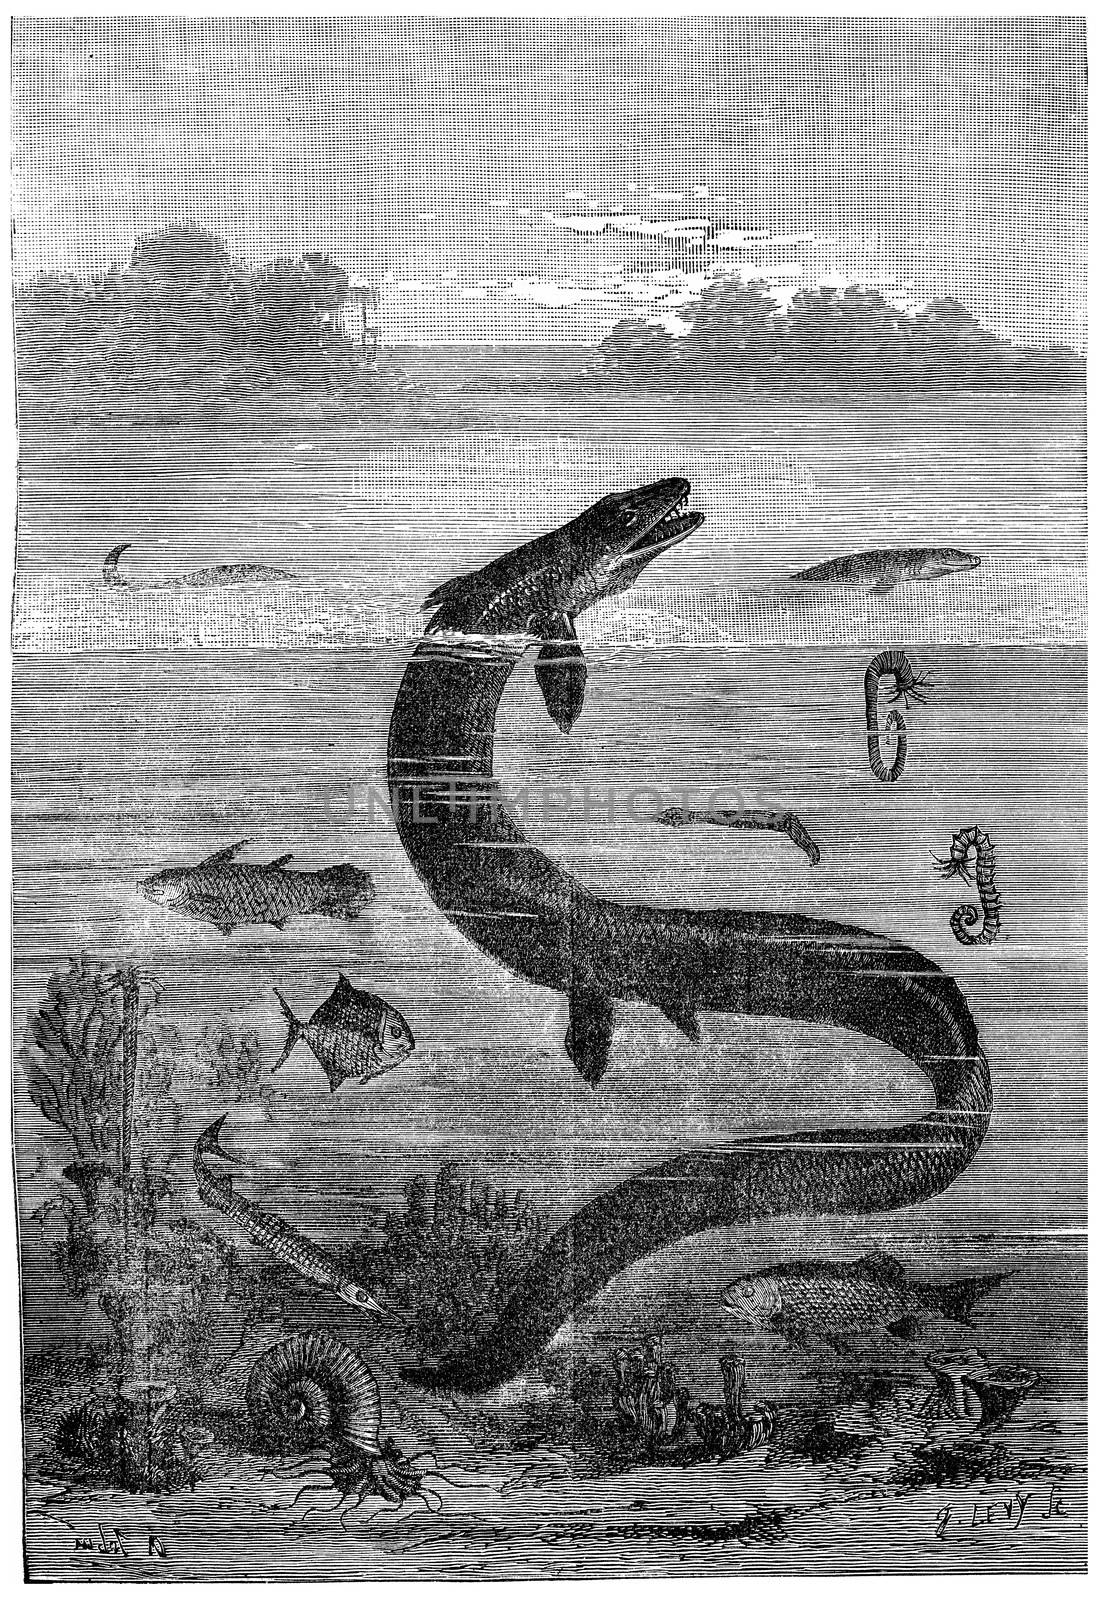 Paris region during the Cretaceous sea, End of the reign of the great mosasaur, vintage engraved illustration. Earth before man – 1886.